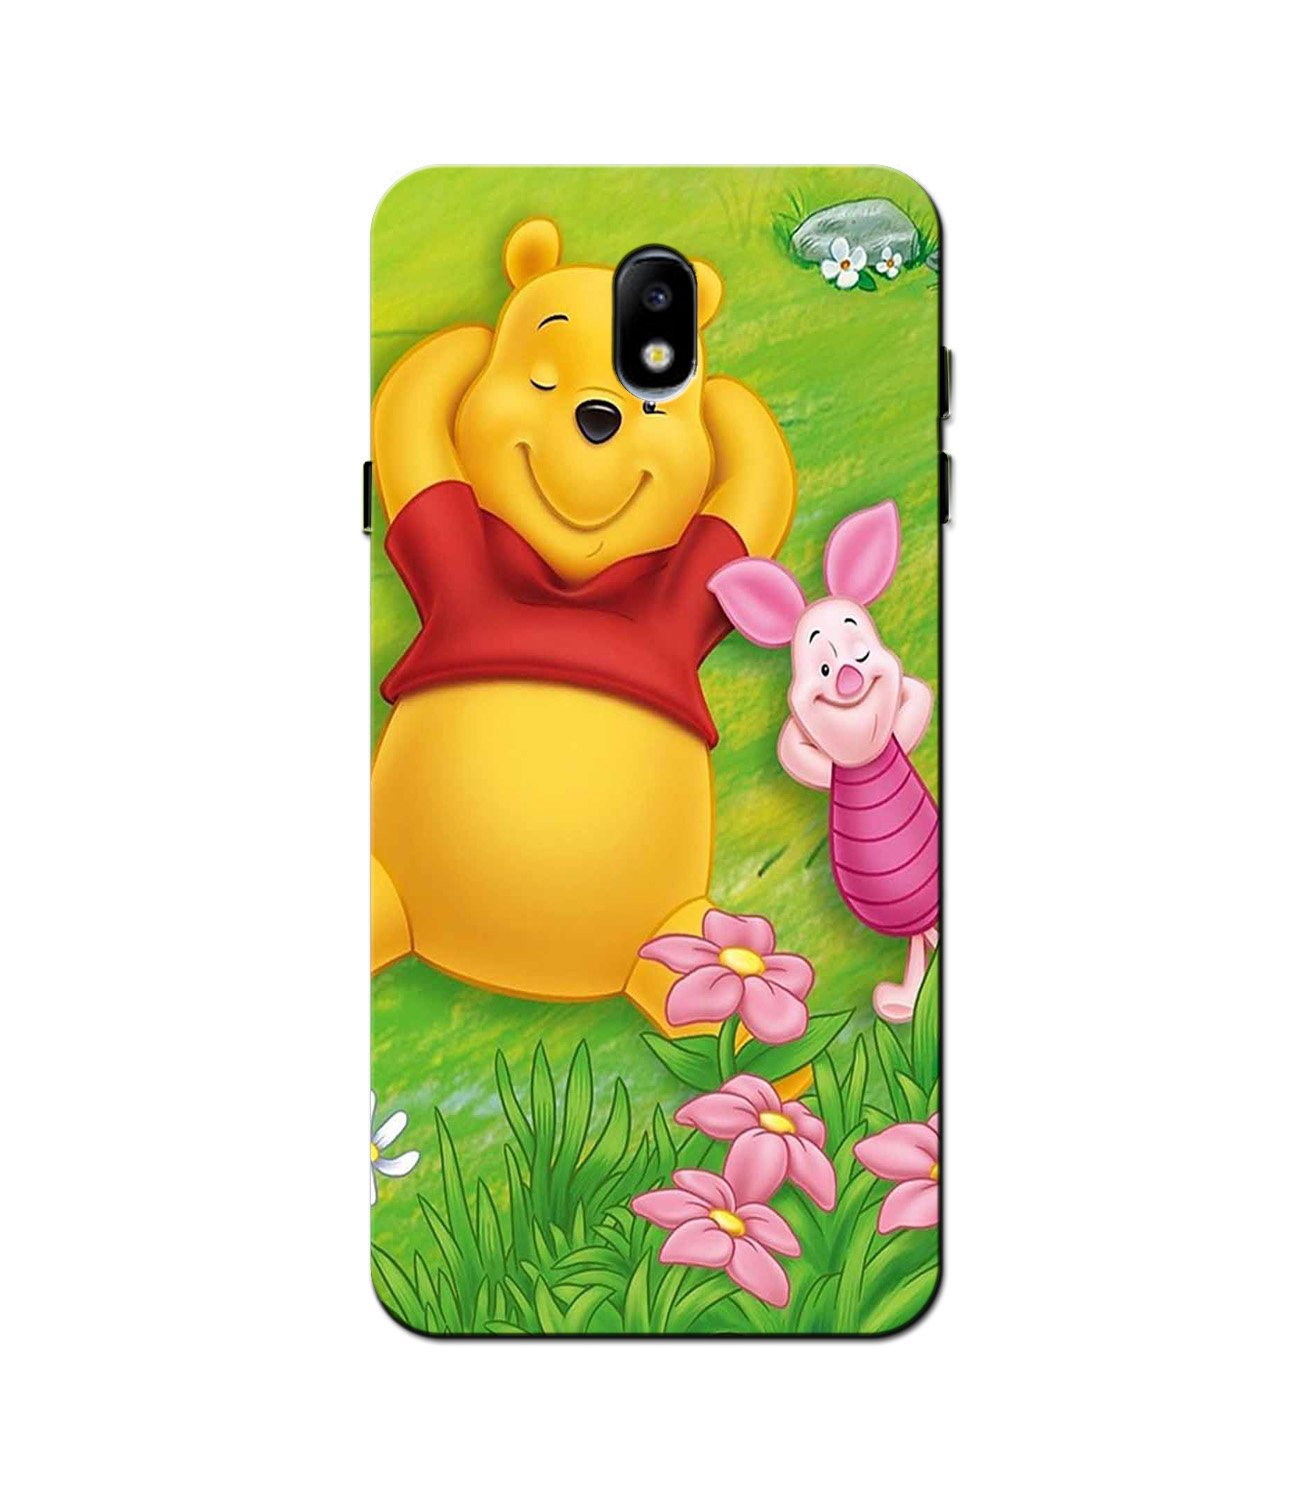 Winnie The Pooh Mobile Back Case for Nokia 2 (Design - 348)